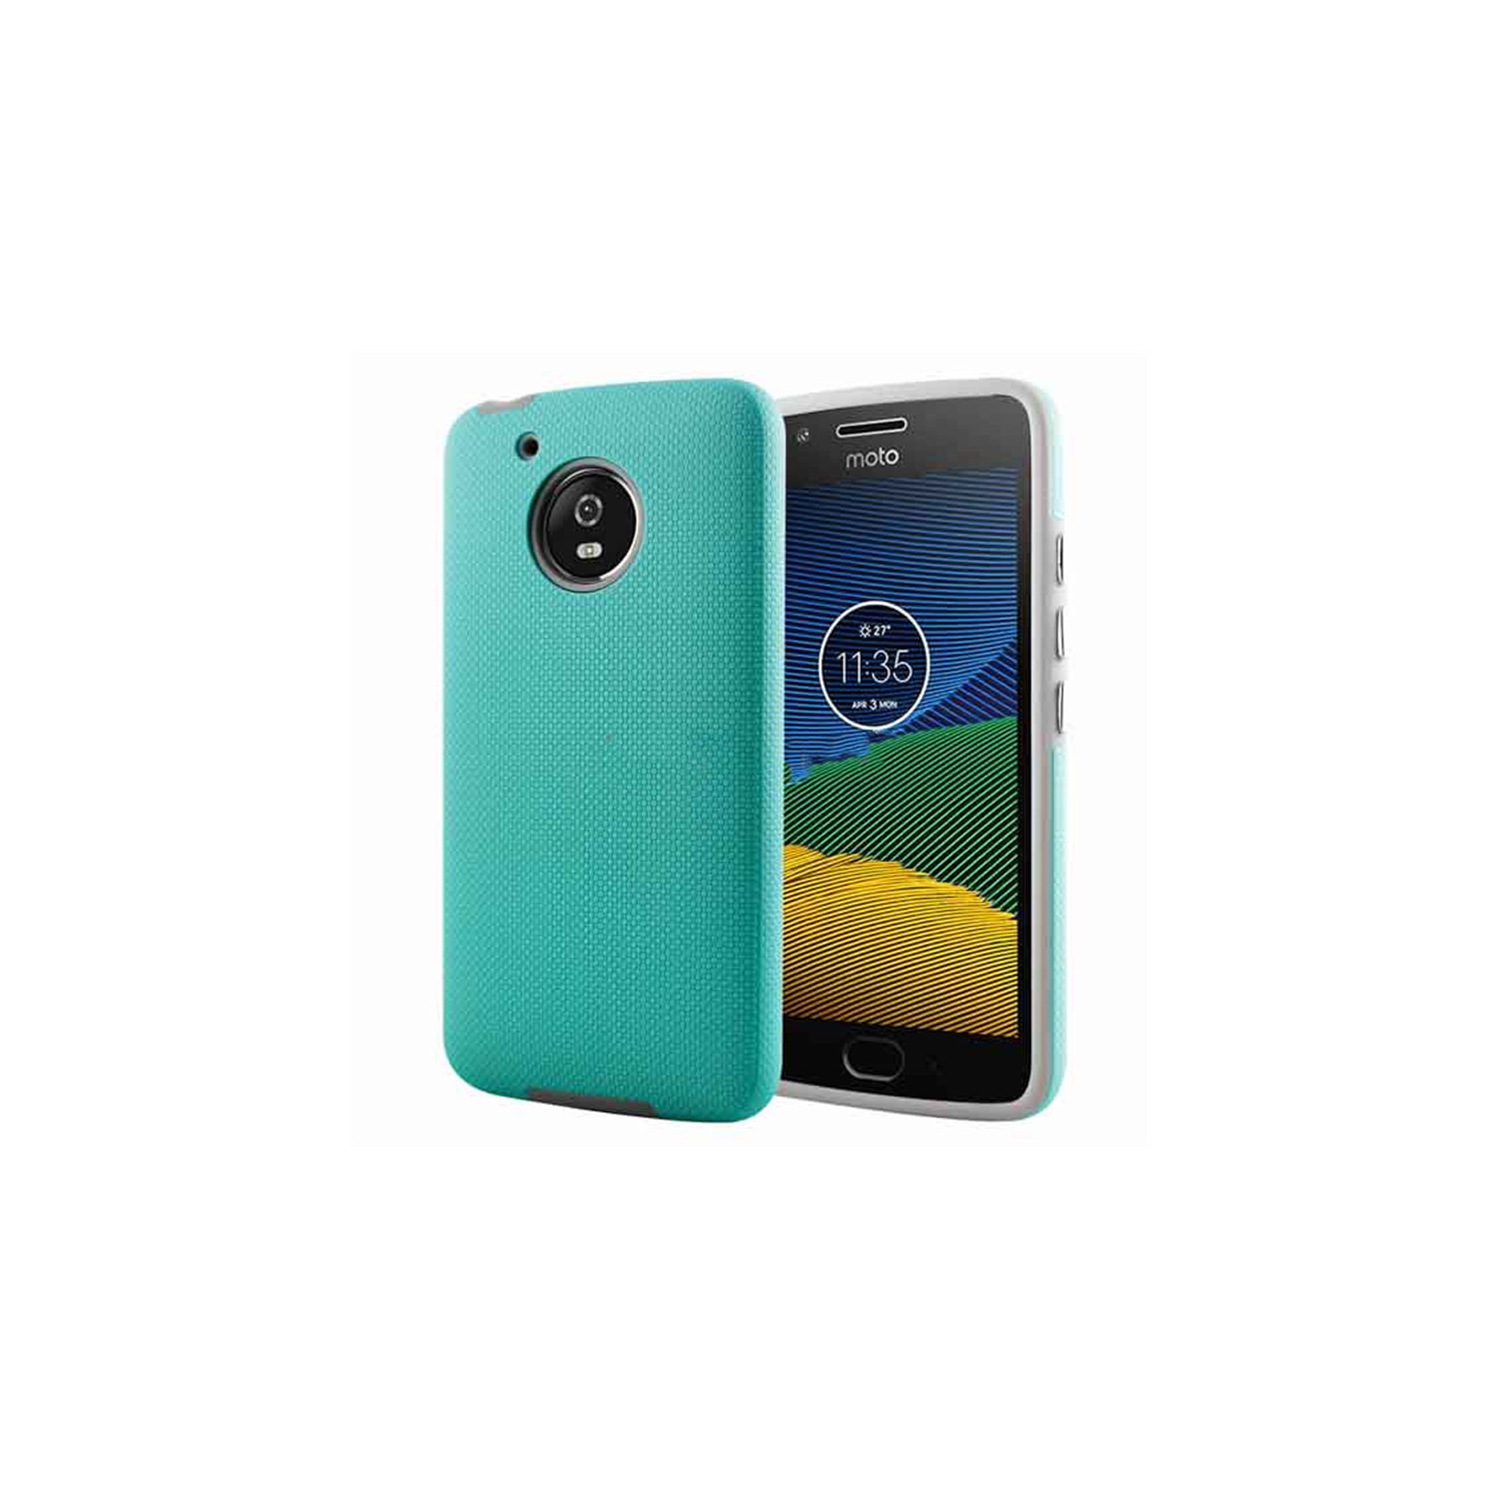 【CSmart】 Slim Fitted Hybrid Hard PC Shell Shockproof Scratch Resistant Case Cover for Motorola Moto Z3 Play, Mint